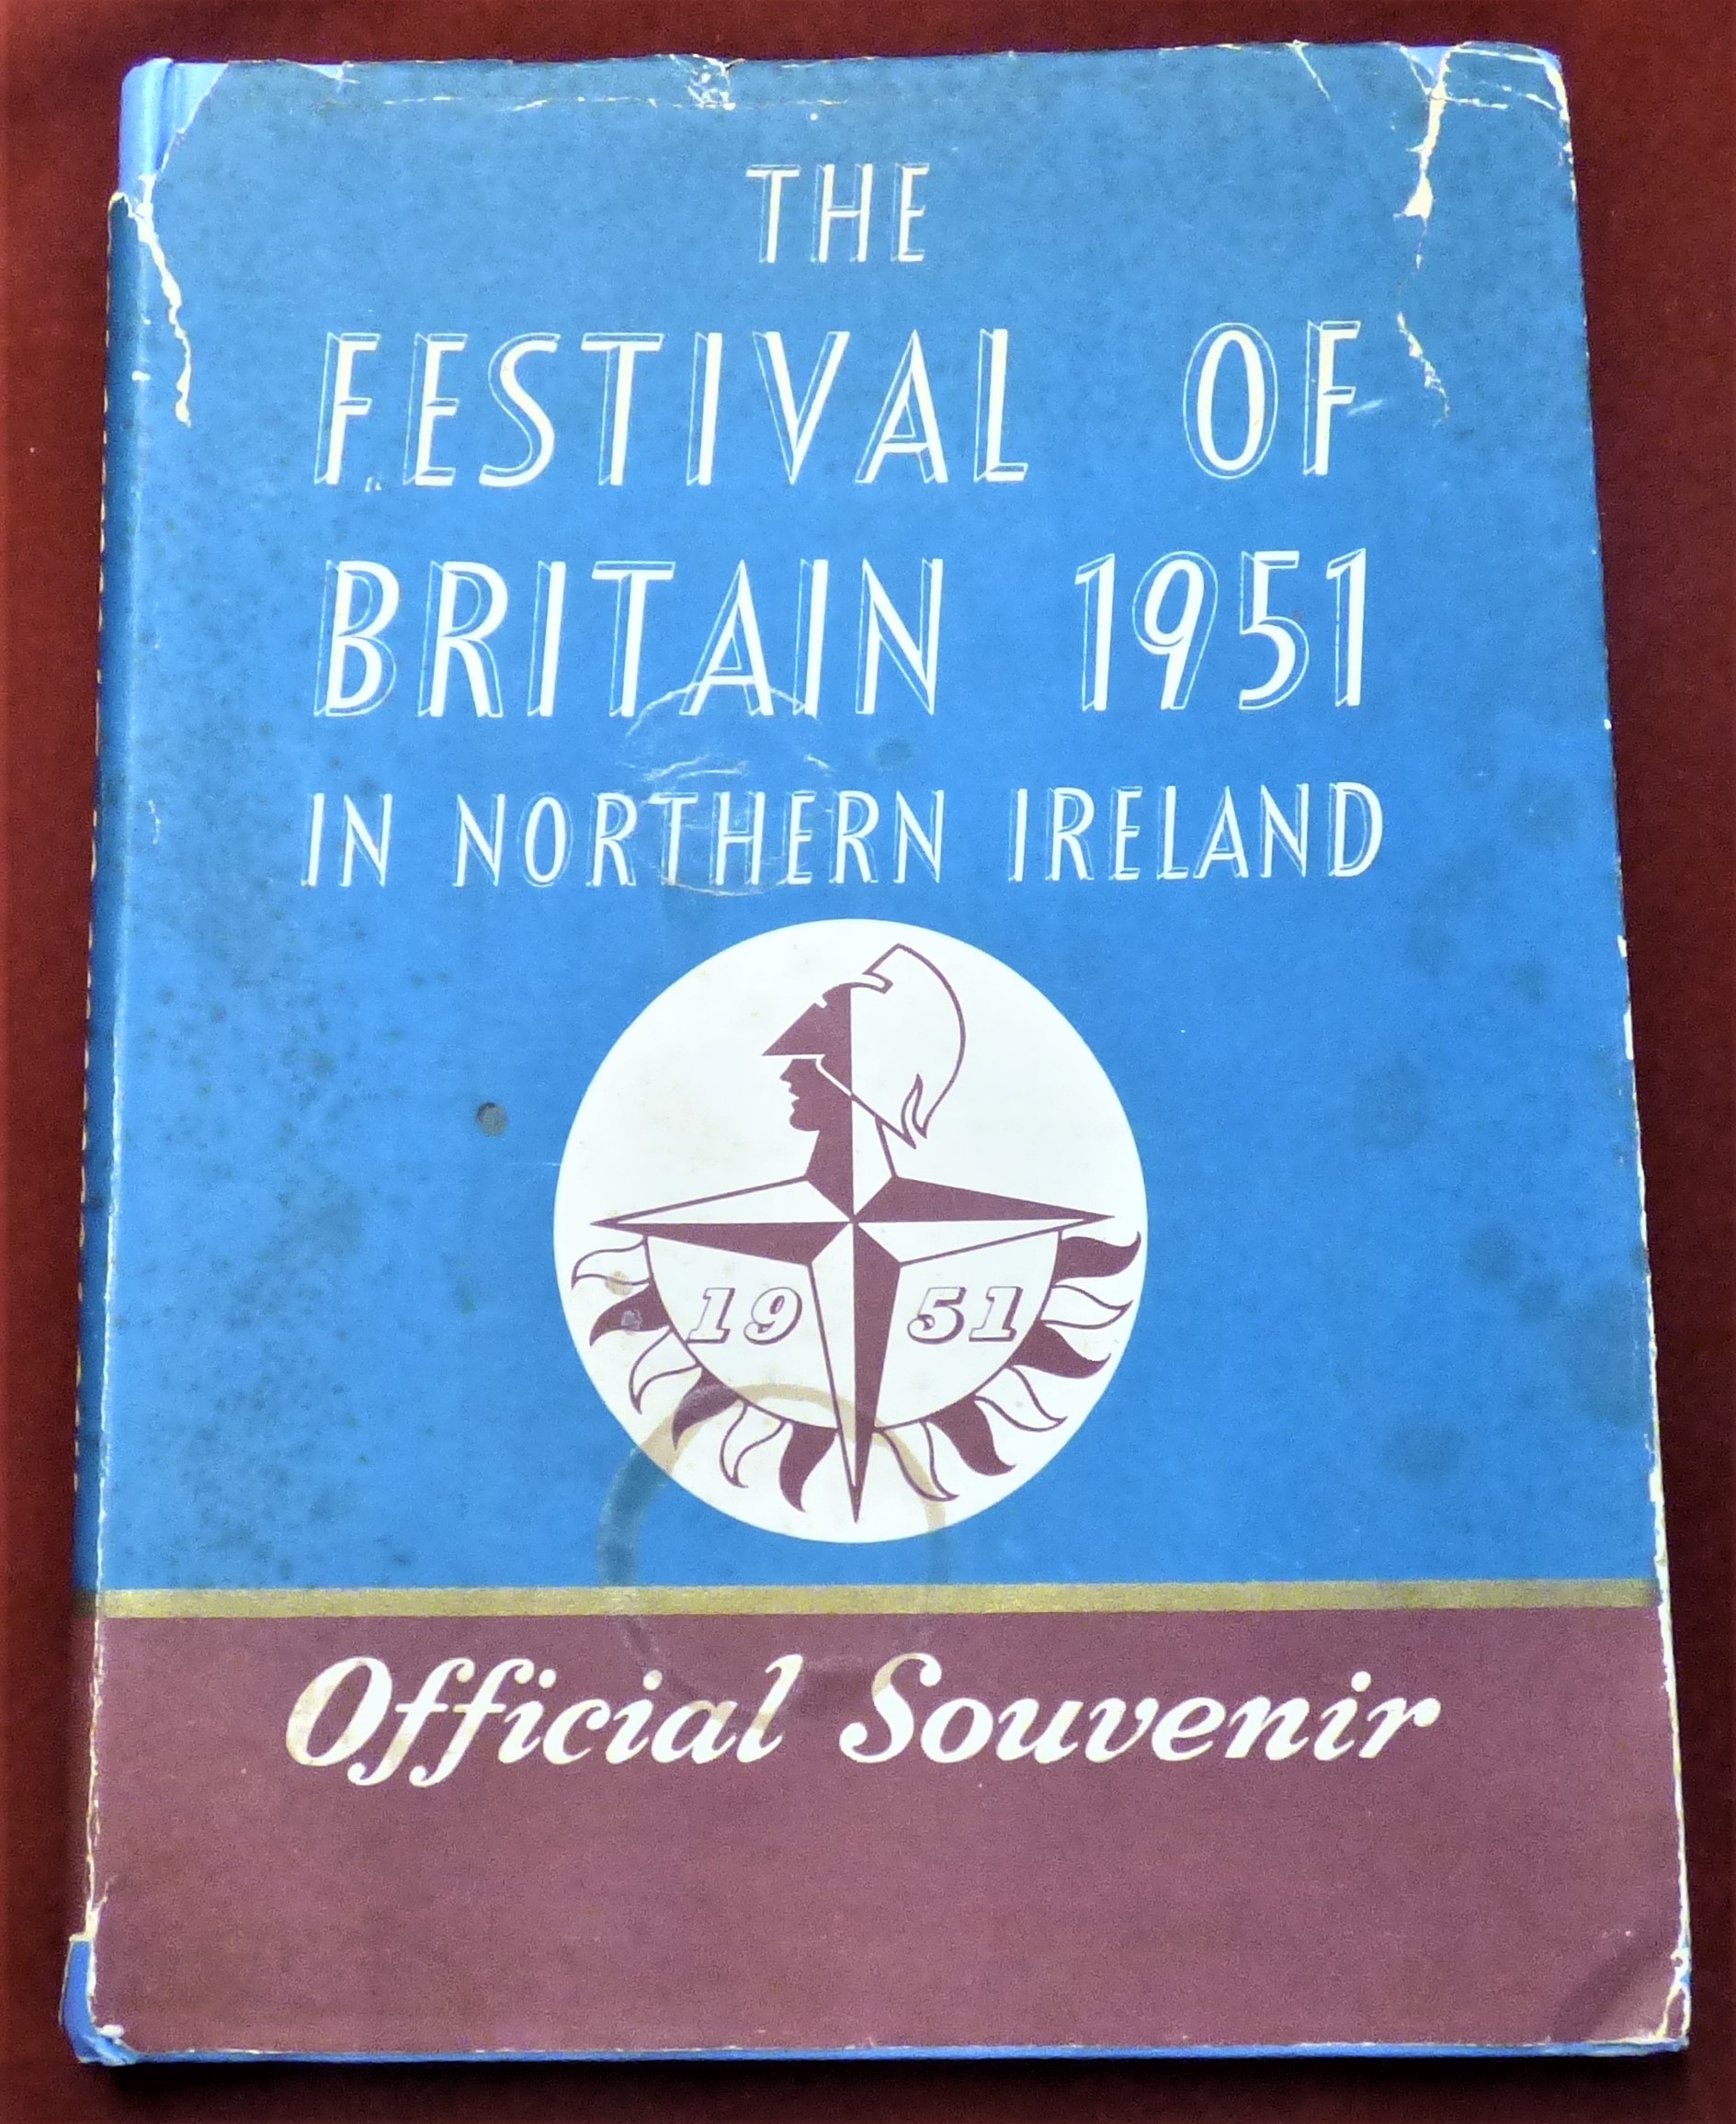 1951 The Festival of Britain in Northern Ireland official Souvenir, hardback with some faults to the